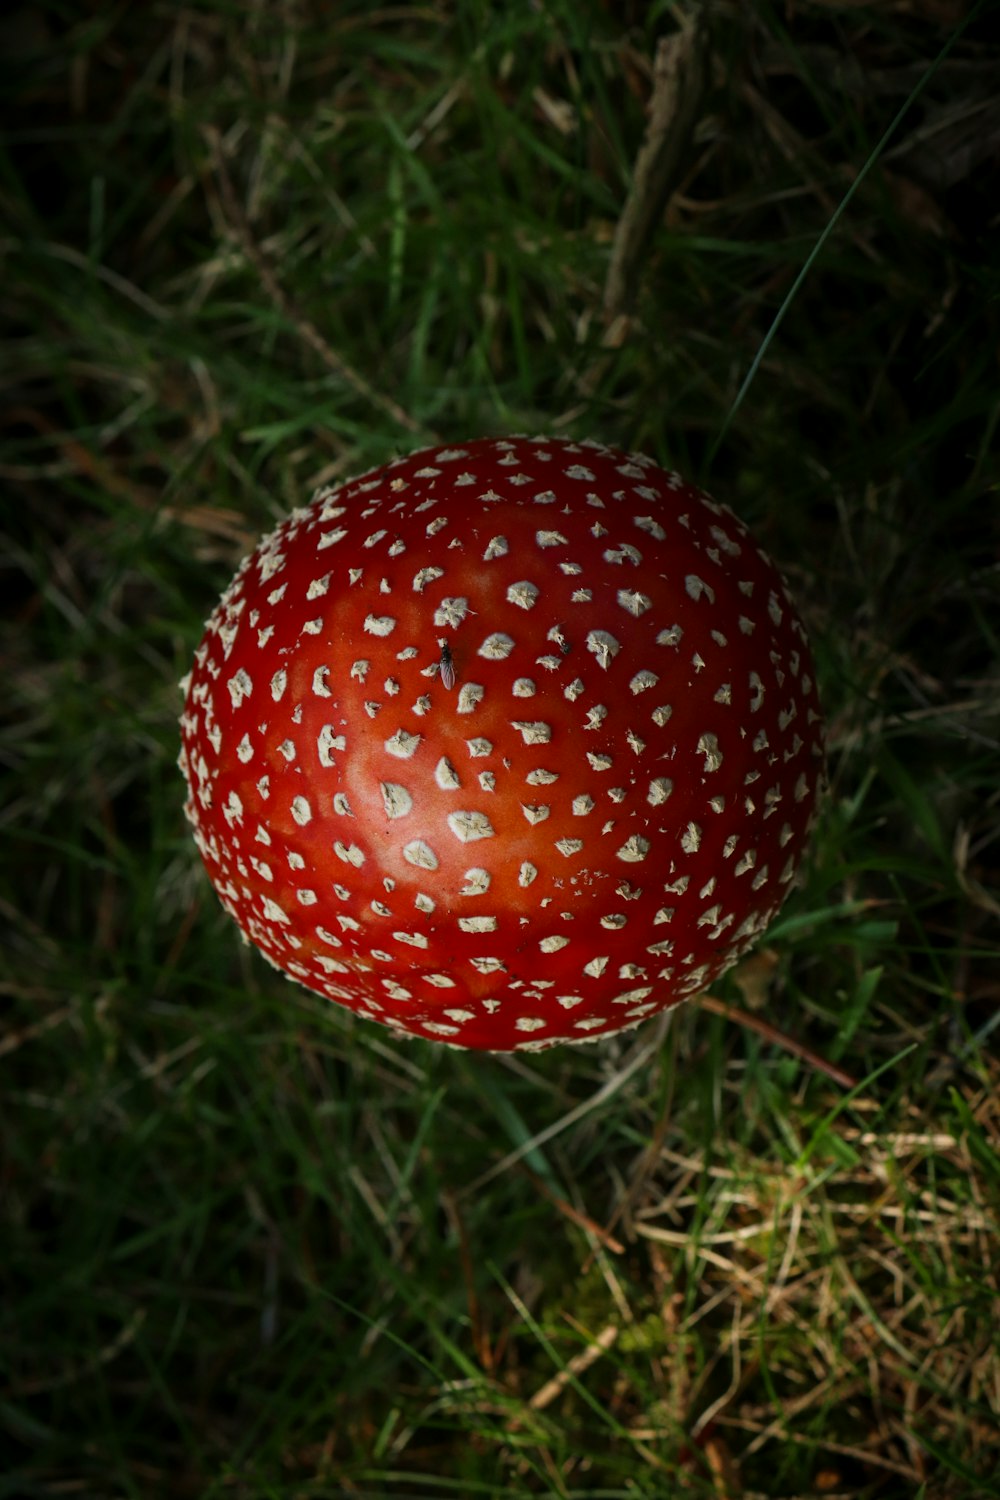 a close up of a red object in the grass